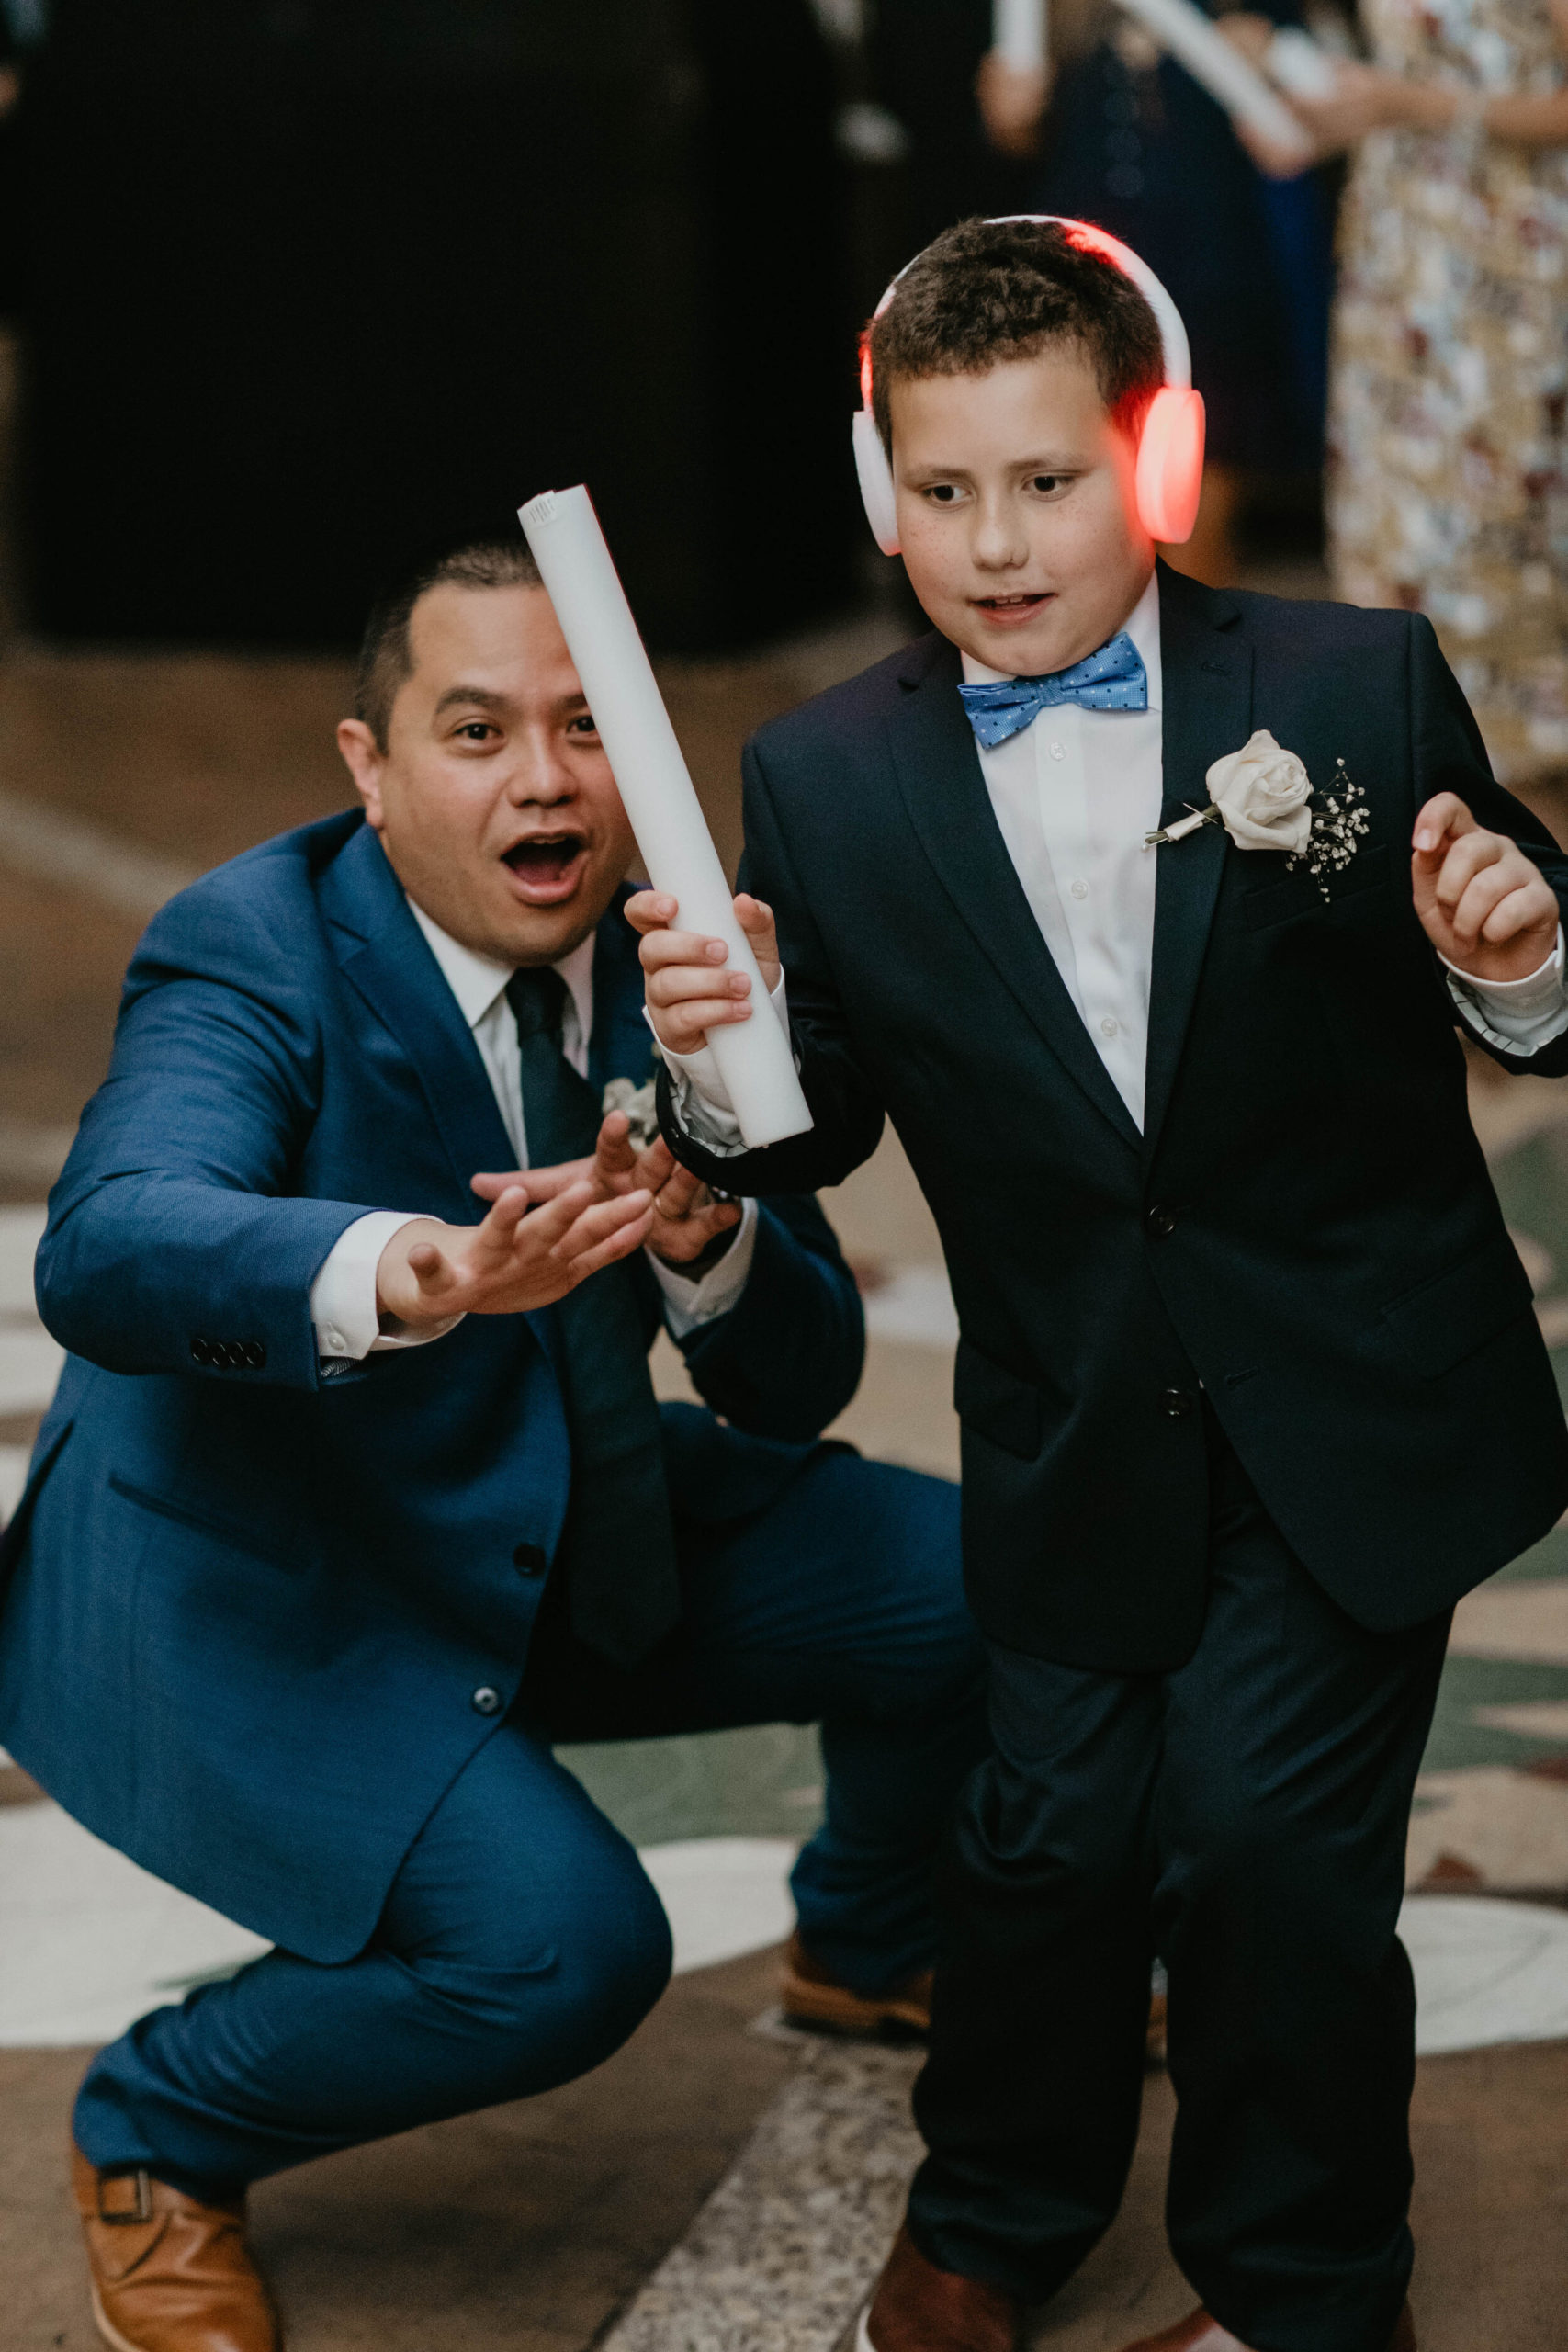 Groom parties with ring bearer